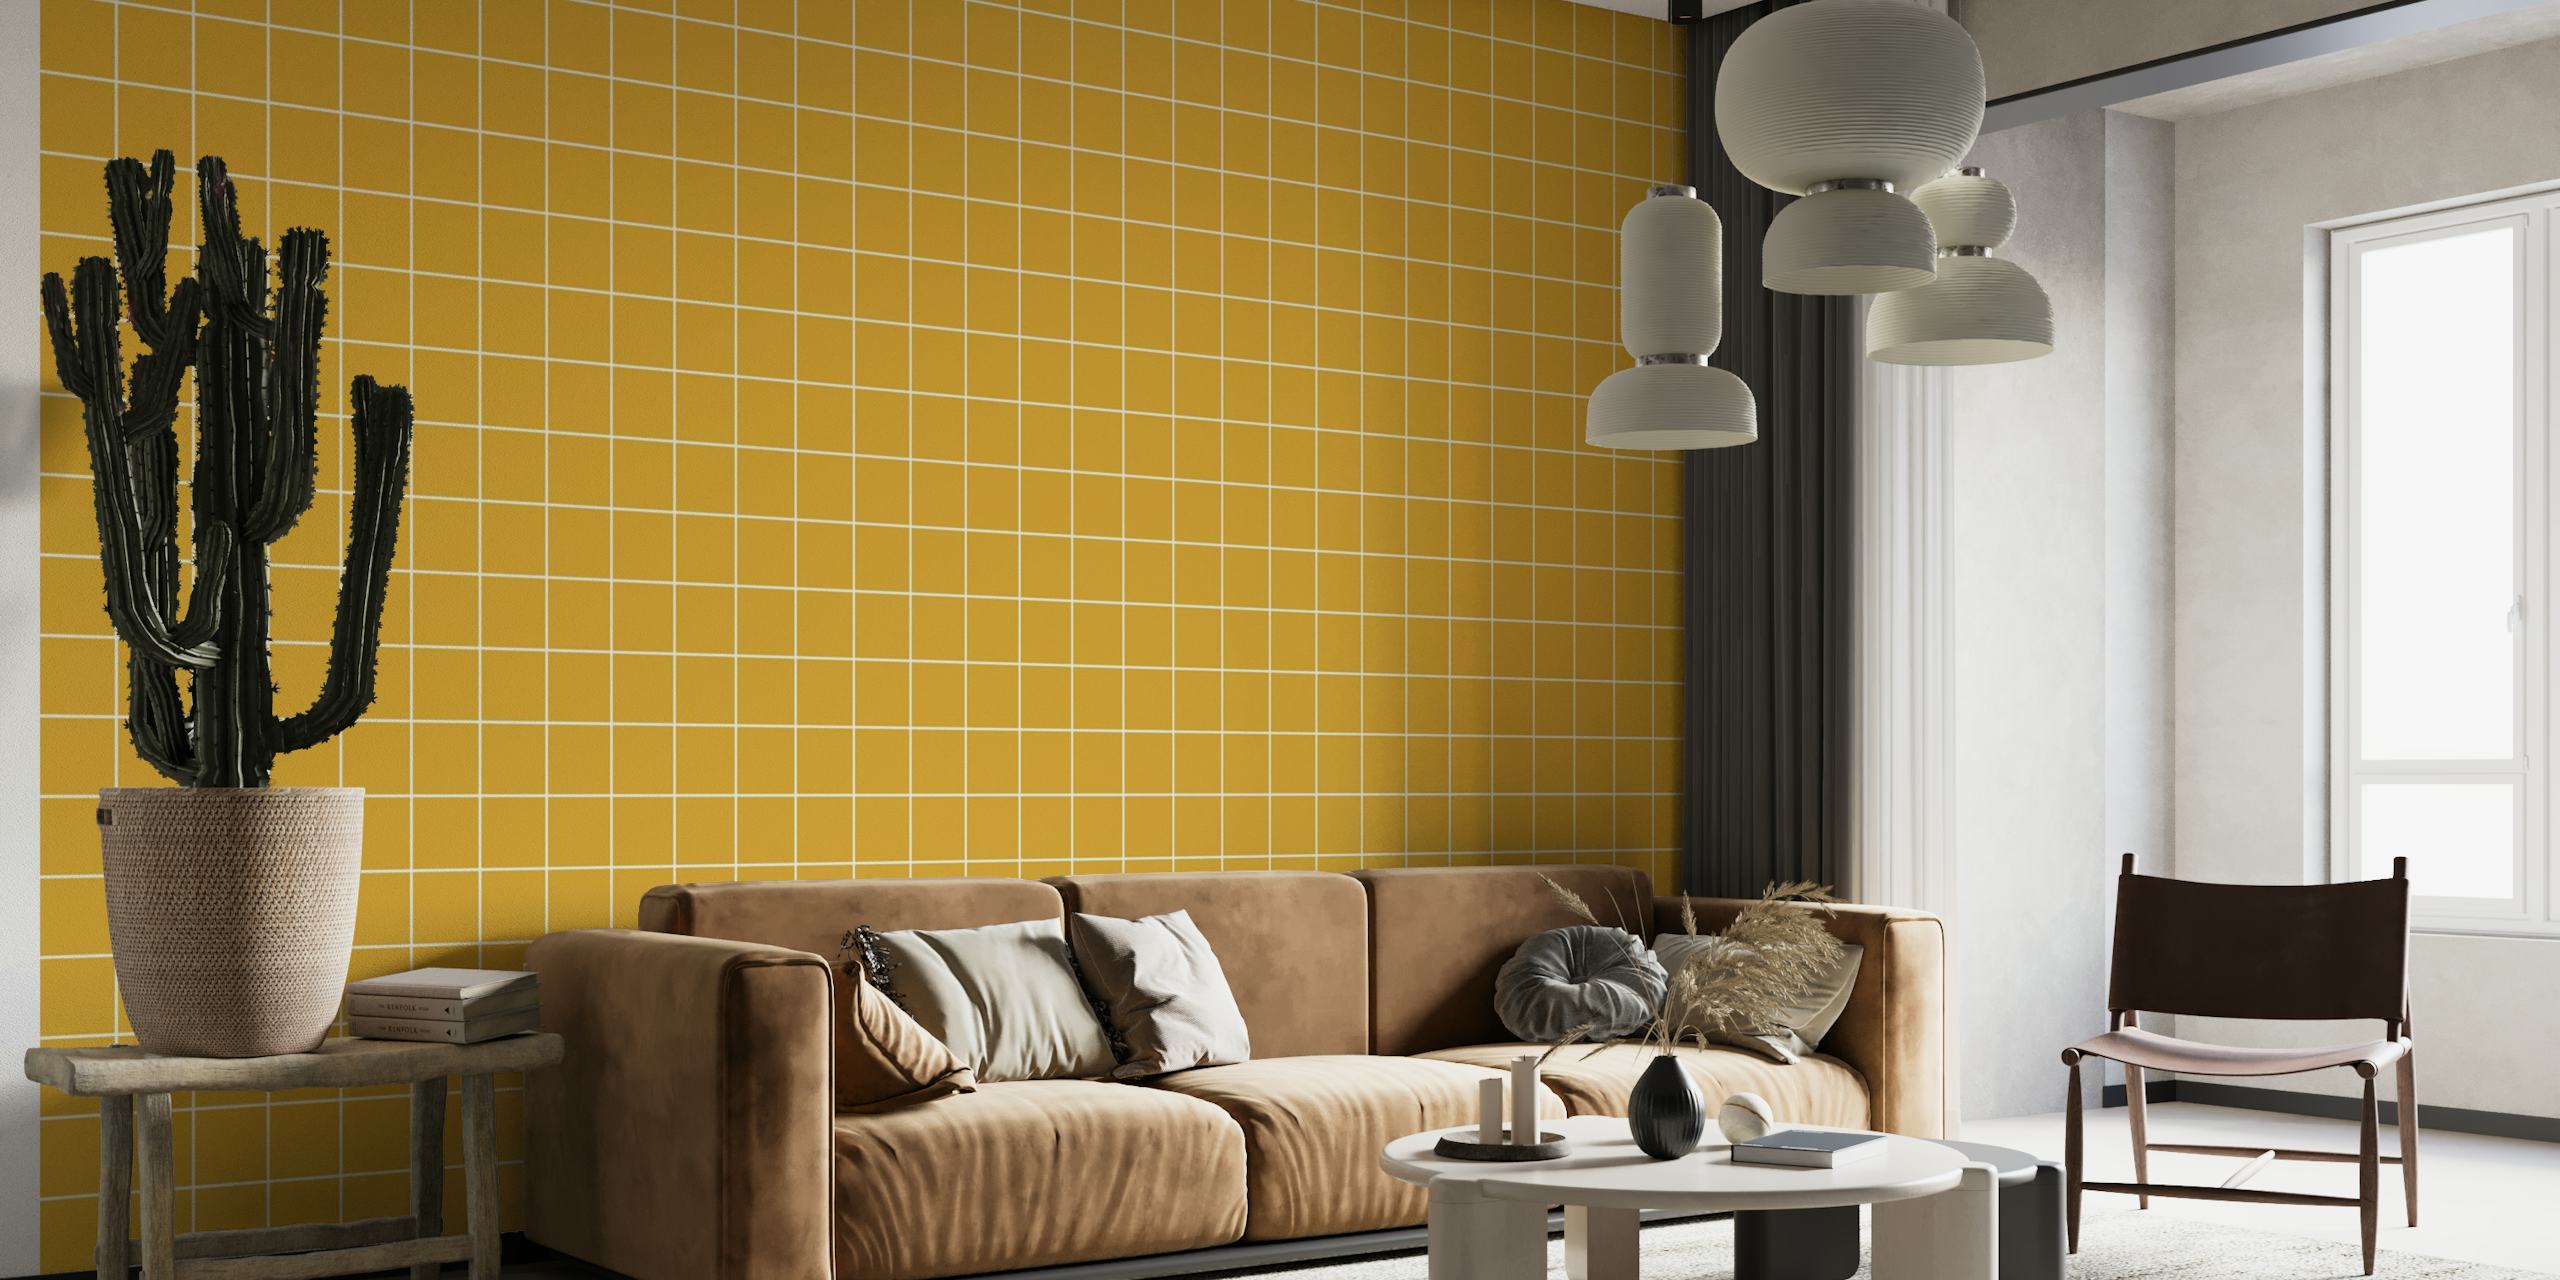 Grid Pattern - Mustard Yellow with Small Grid papel de parede